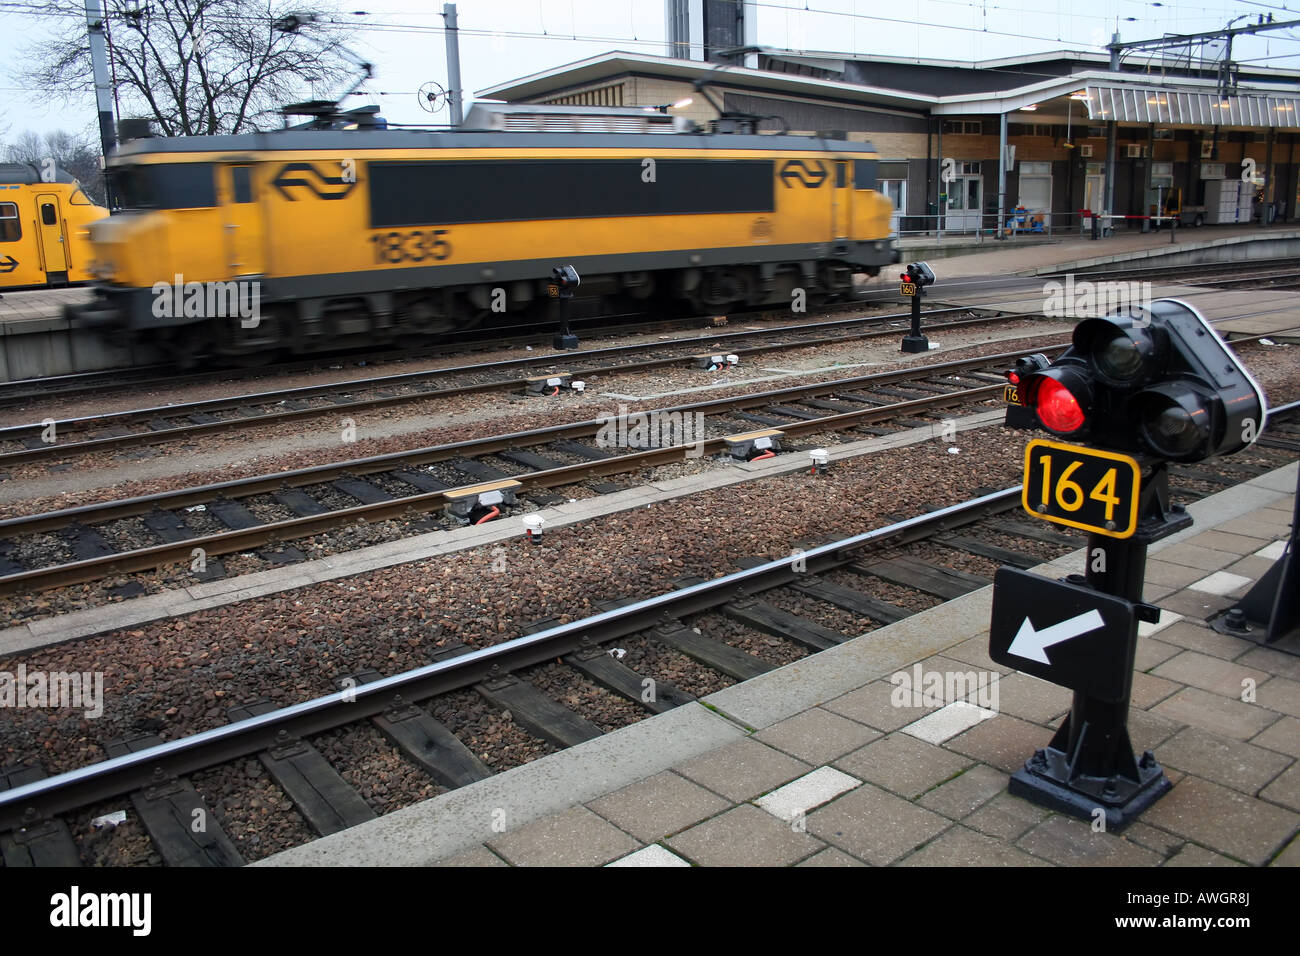 A Locomotive Arriving at the Station in Venlo, Netherlands Stock Photo